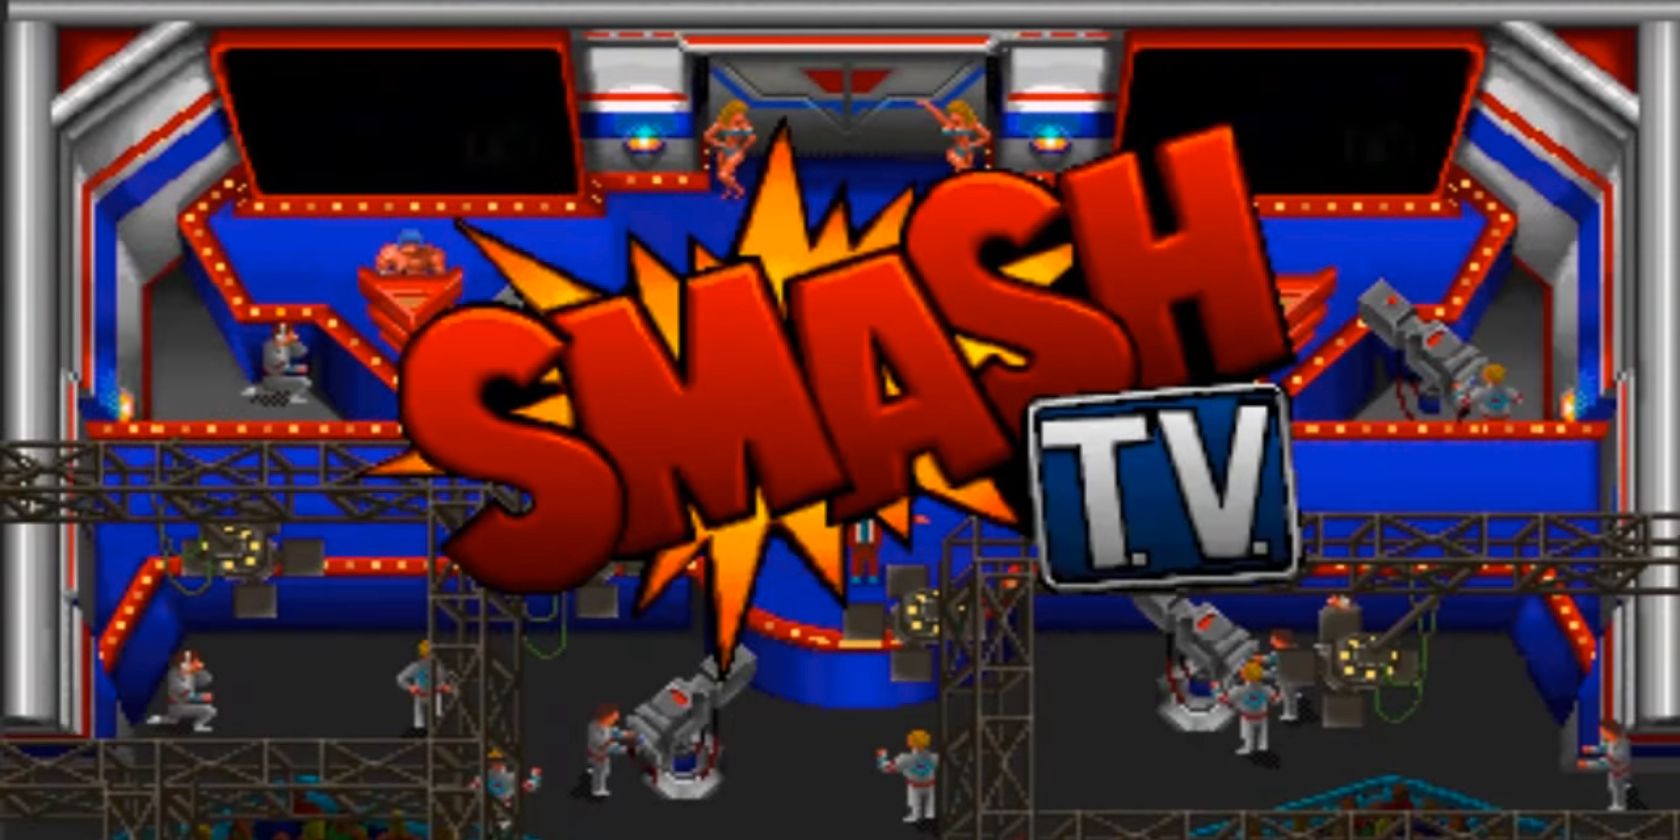 The main title screen from Smash TV